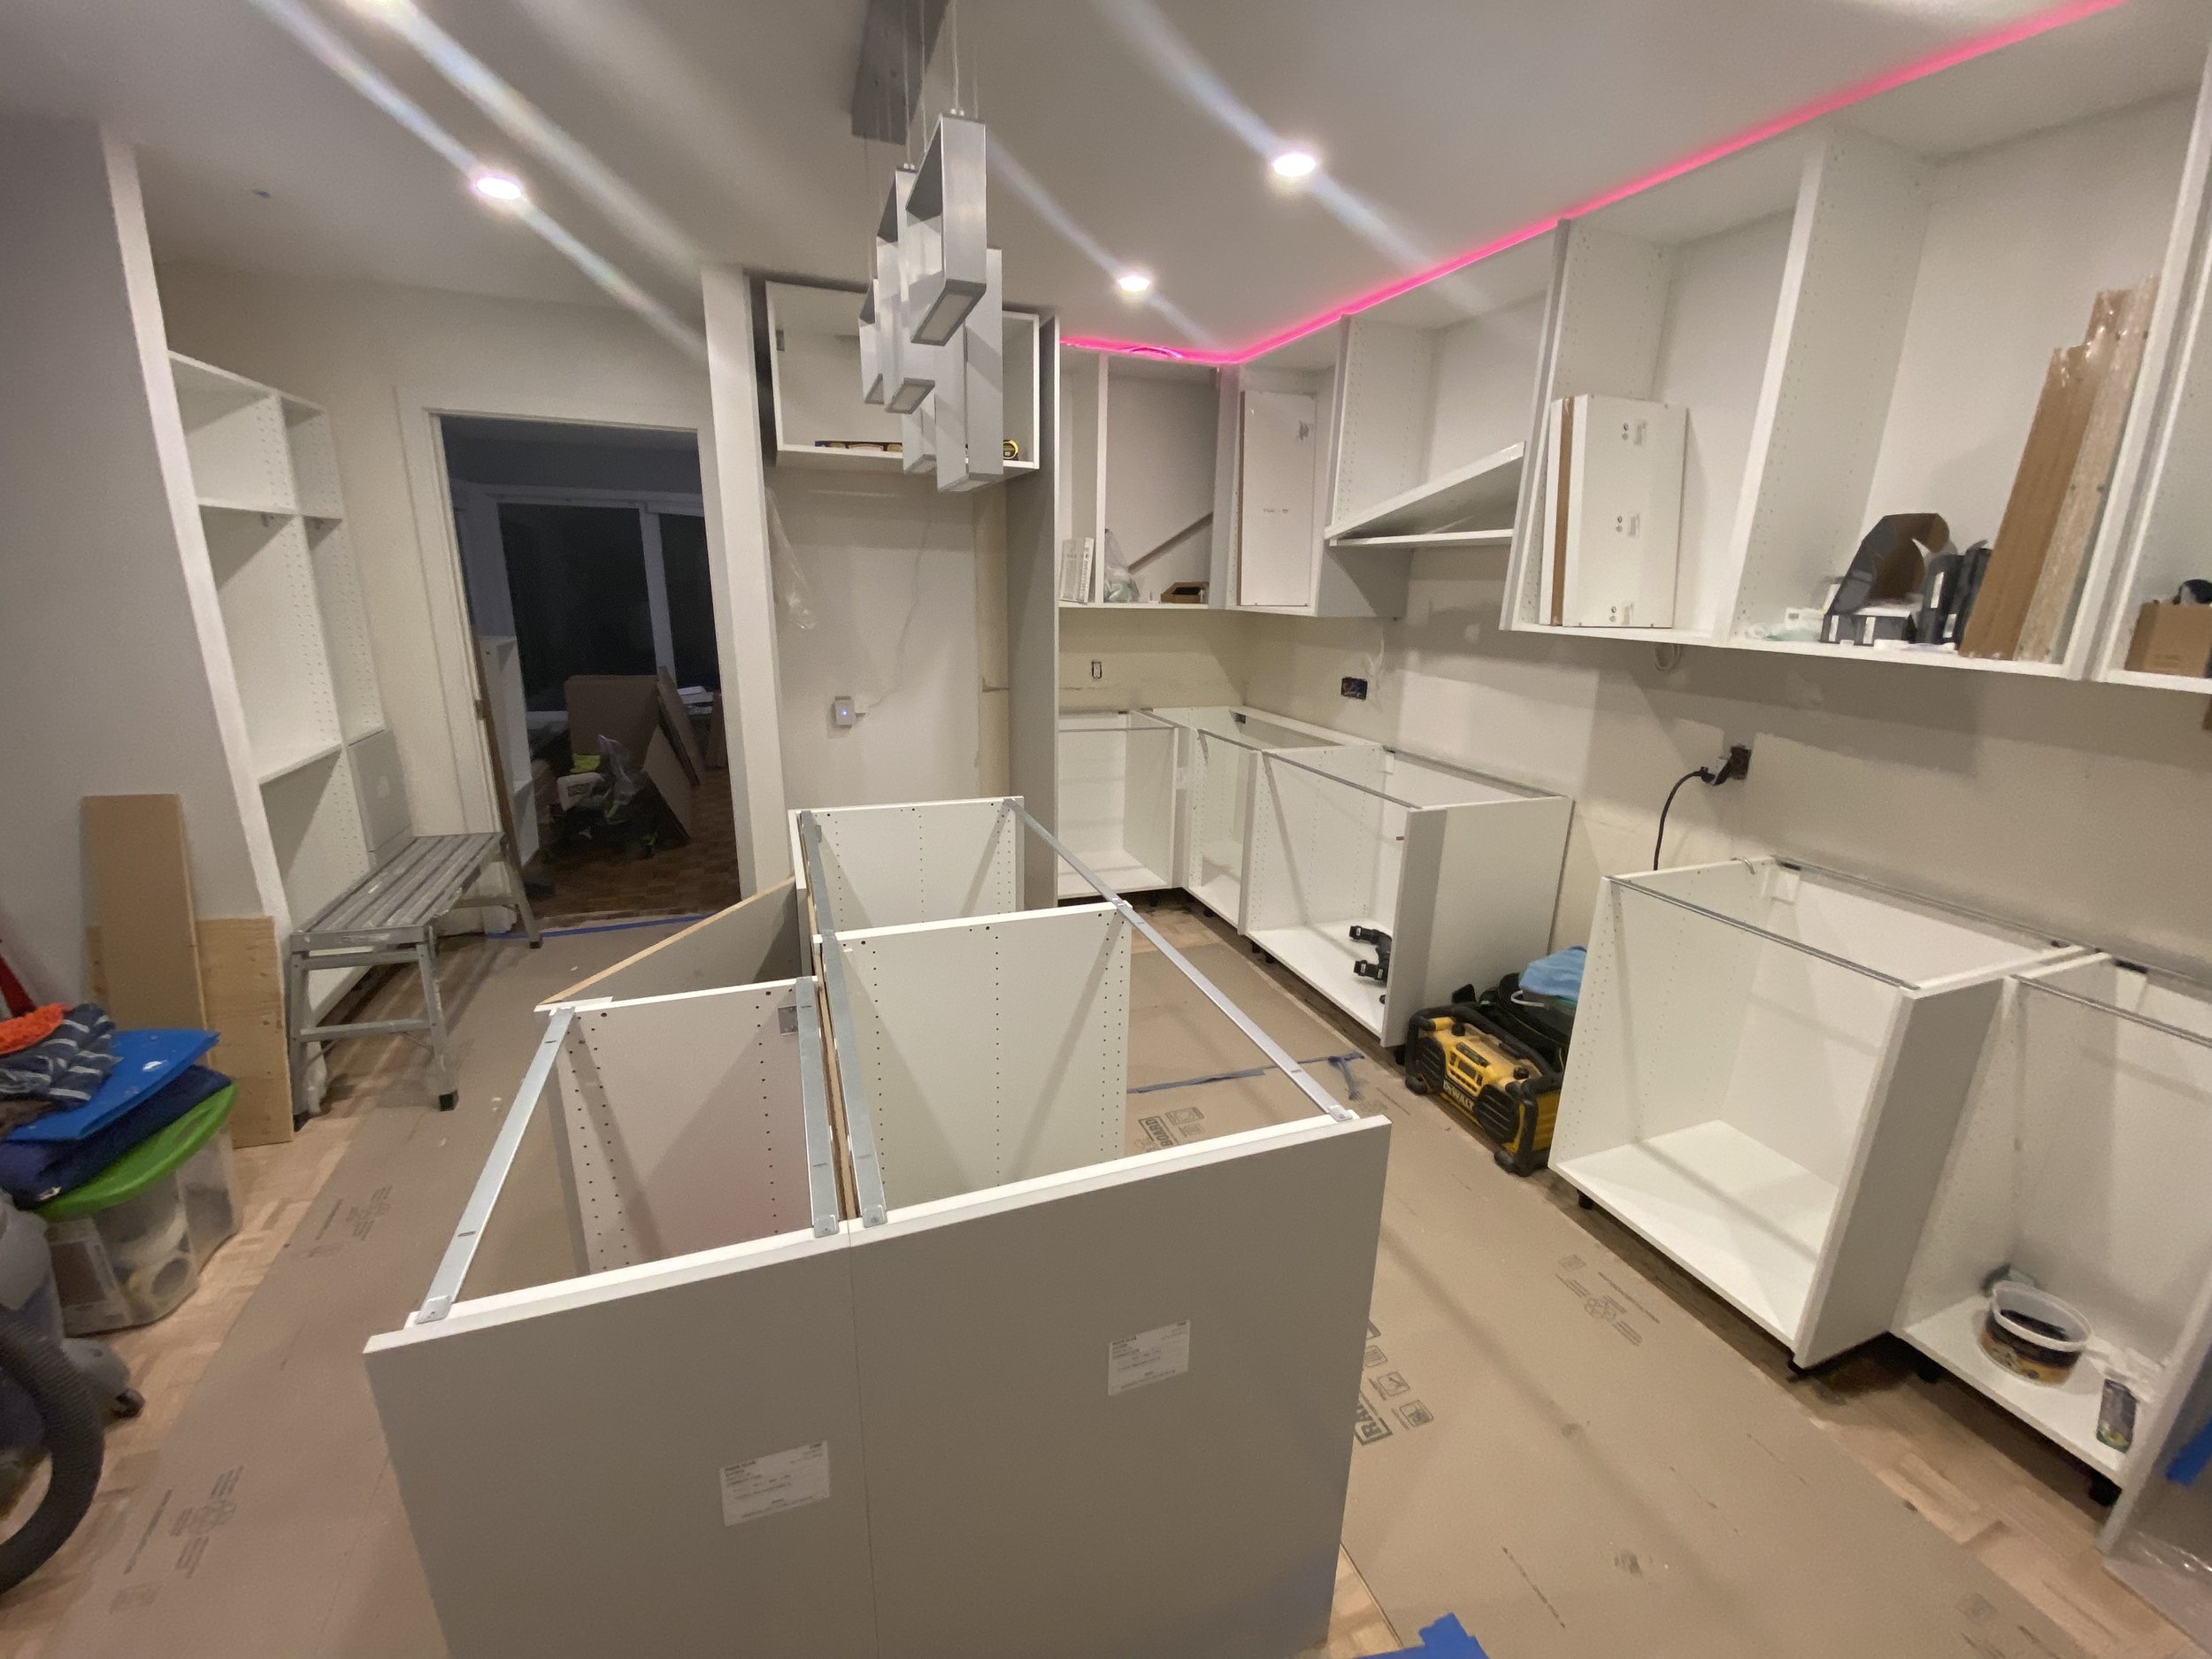 Condo Kitchen Renovation in Ramsay Heights